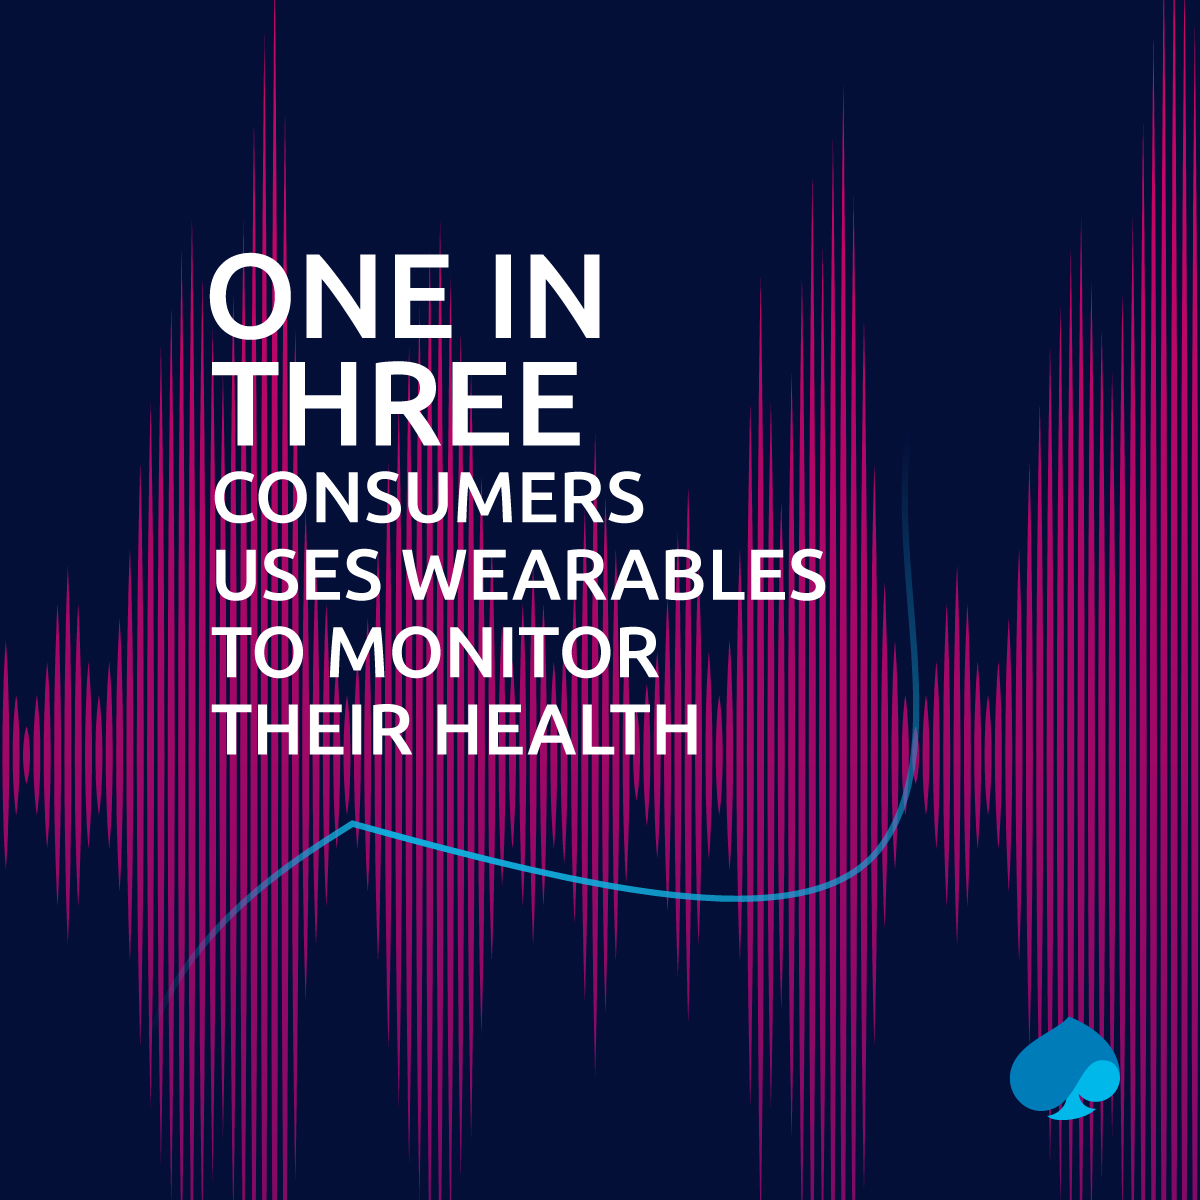 ⌚ In our latest global survey of 10,000 consumers, we found that 60% of consumers feel health wearables/trackers help them maintain and improve their health. Download our #ConnectedProducts report to learn more about #ConnectedTechnologies📥 bit.ly/47oyjXh